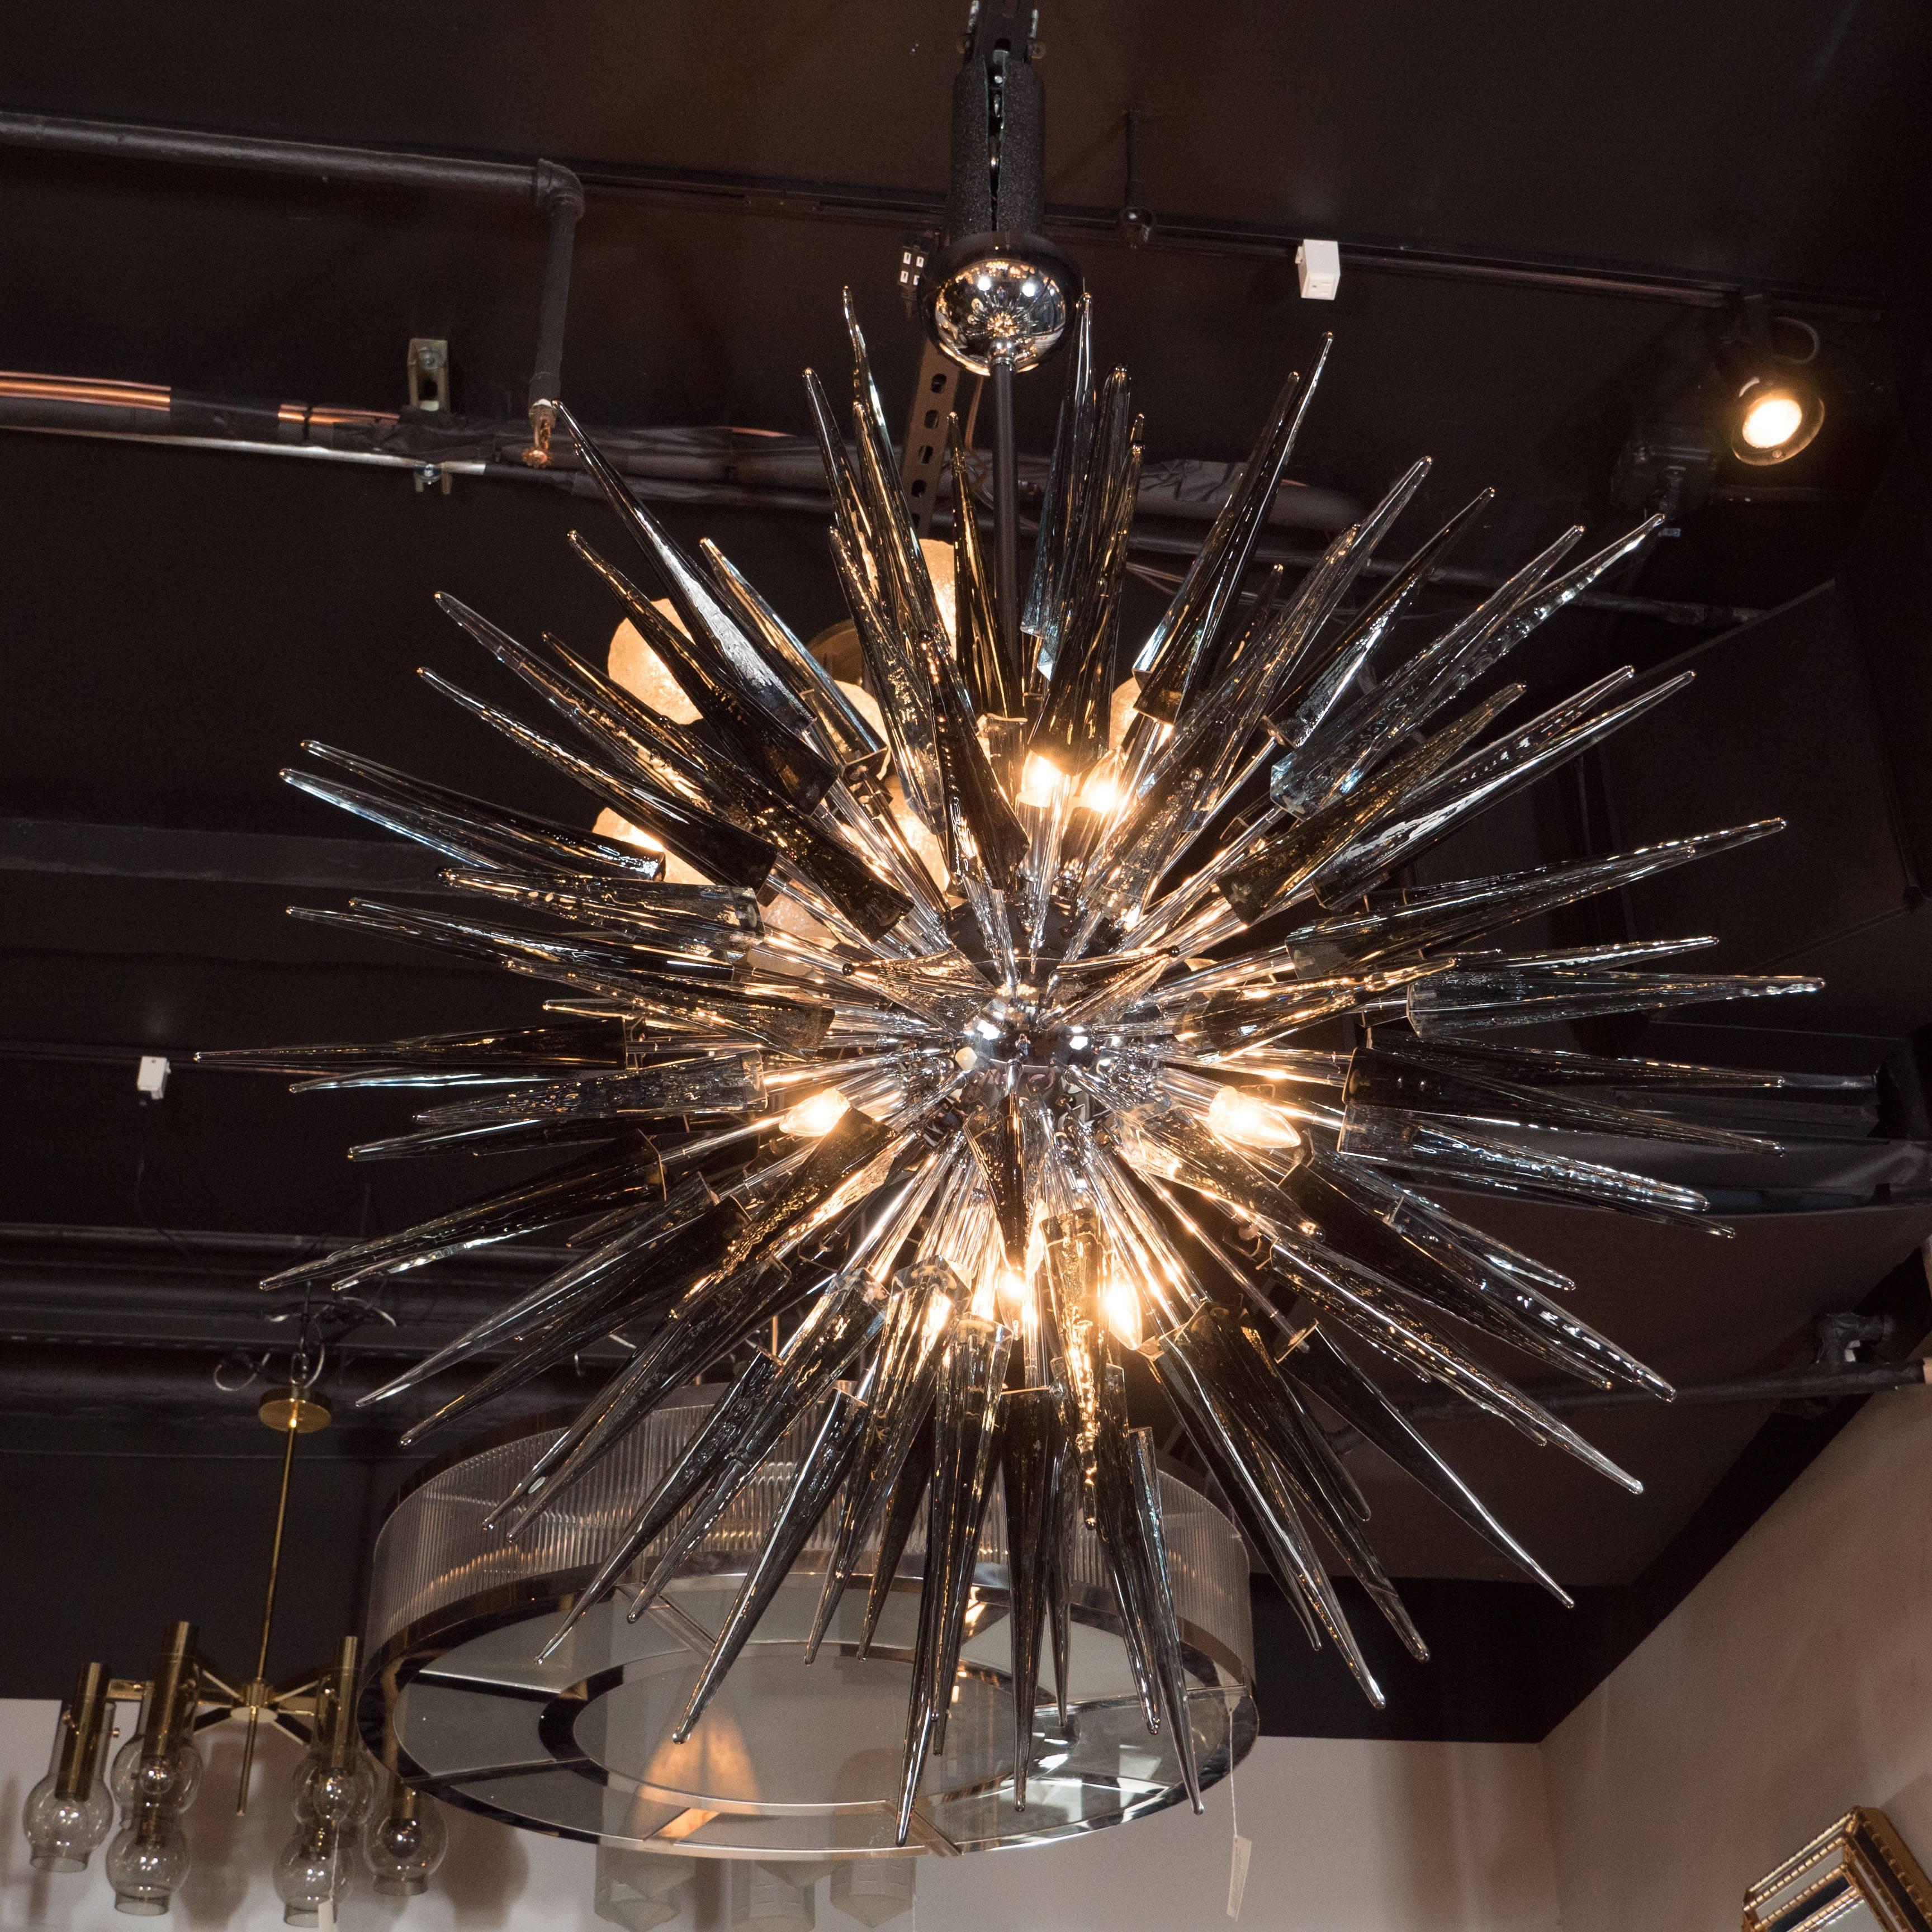 This stunning smoked grey Murano glass spiked starburst chandelier was hand blown in Italy, circa 2000. It features an abundance of spiked rods emanating from its center in alternating lengths, giving its overall form a staggered